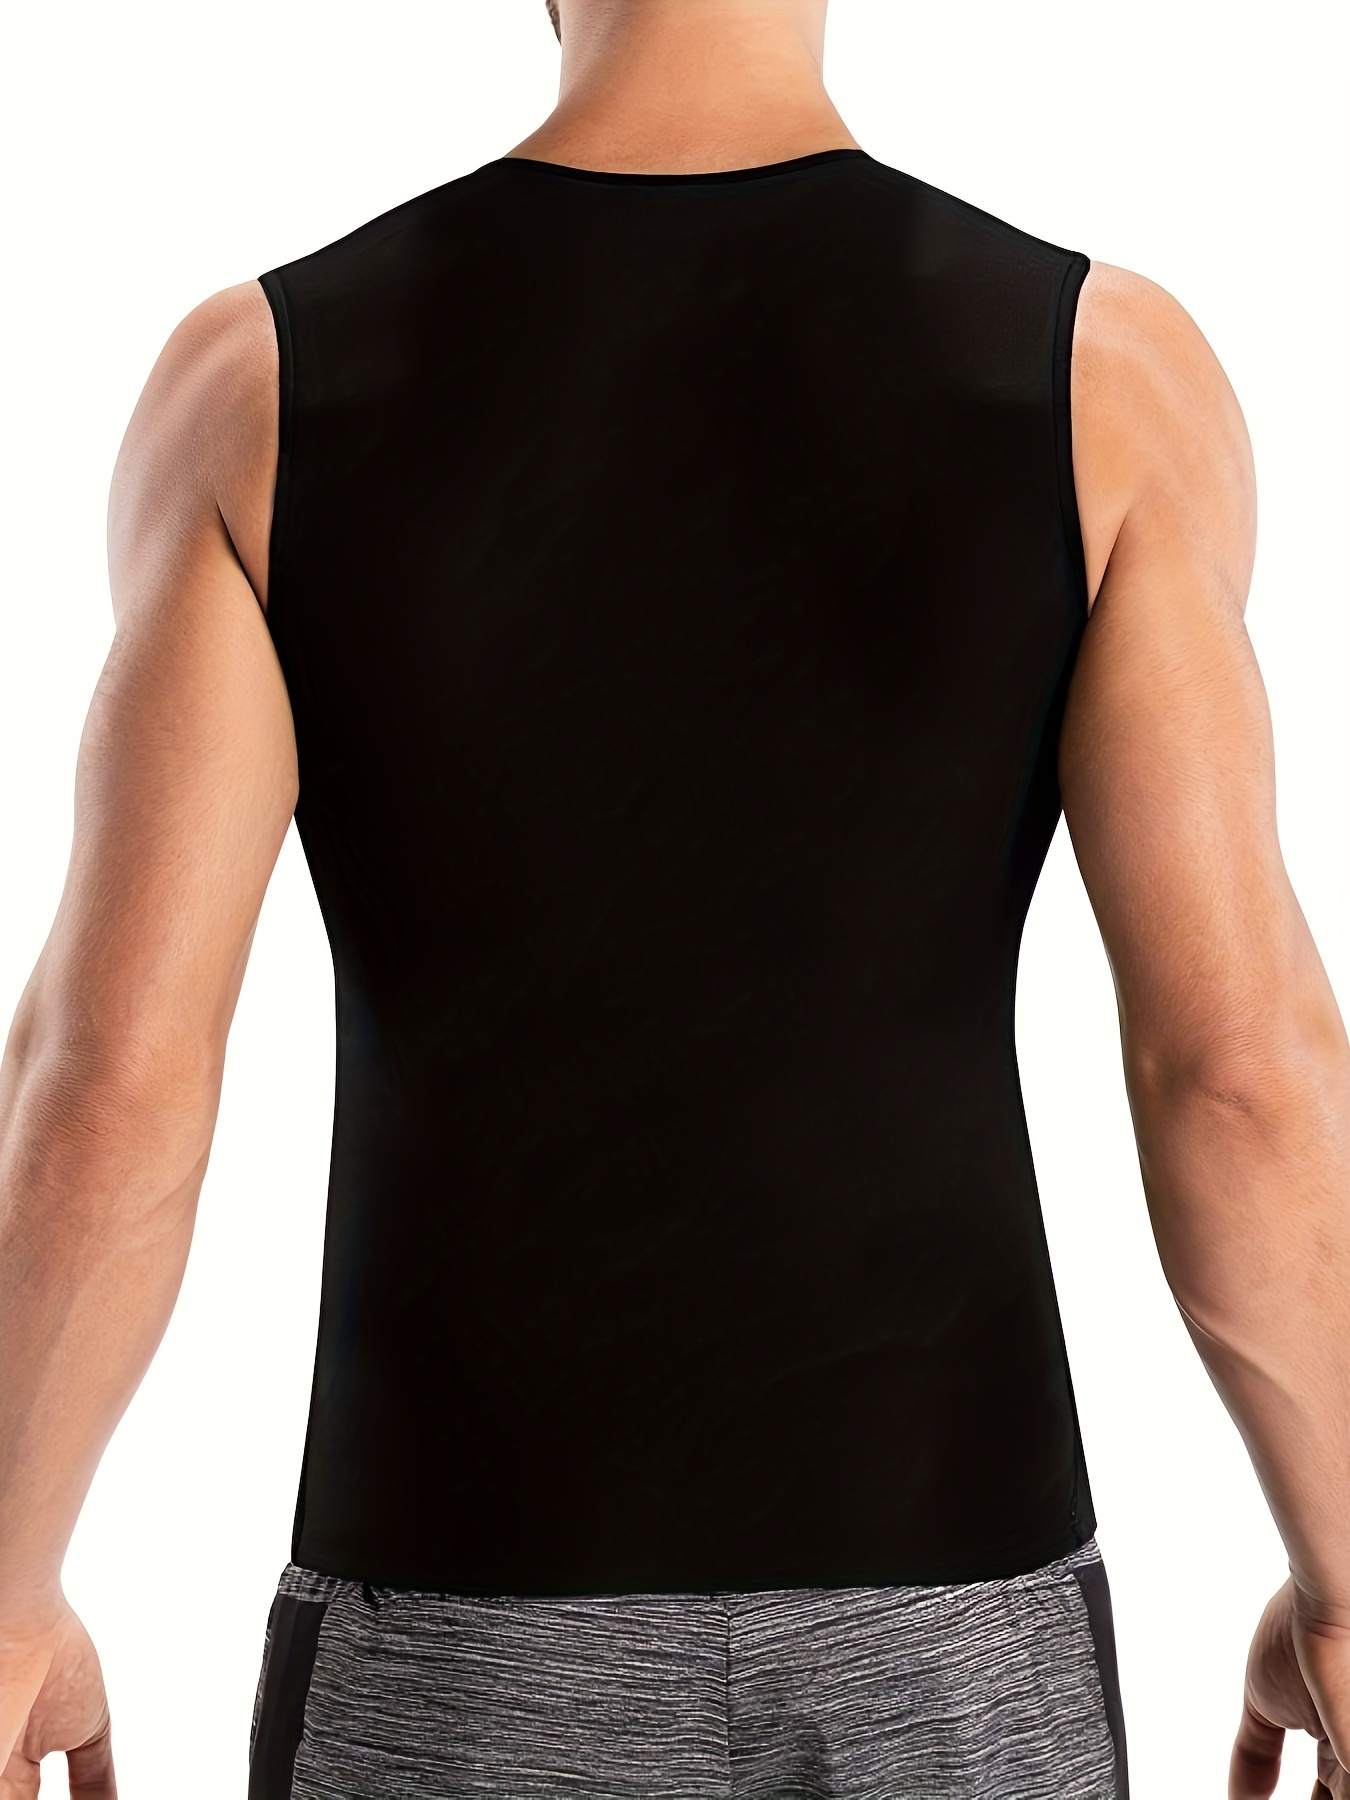  Sauna Mens Body Shaper Vest, Slimming Vest for Men, Comfortable  Men Shapewear Tank Top for Home Gym Exercise Body Shaping : Sports &  Outdoors